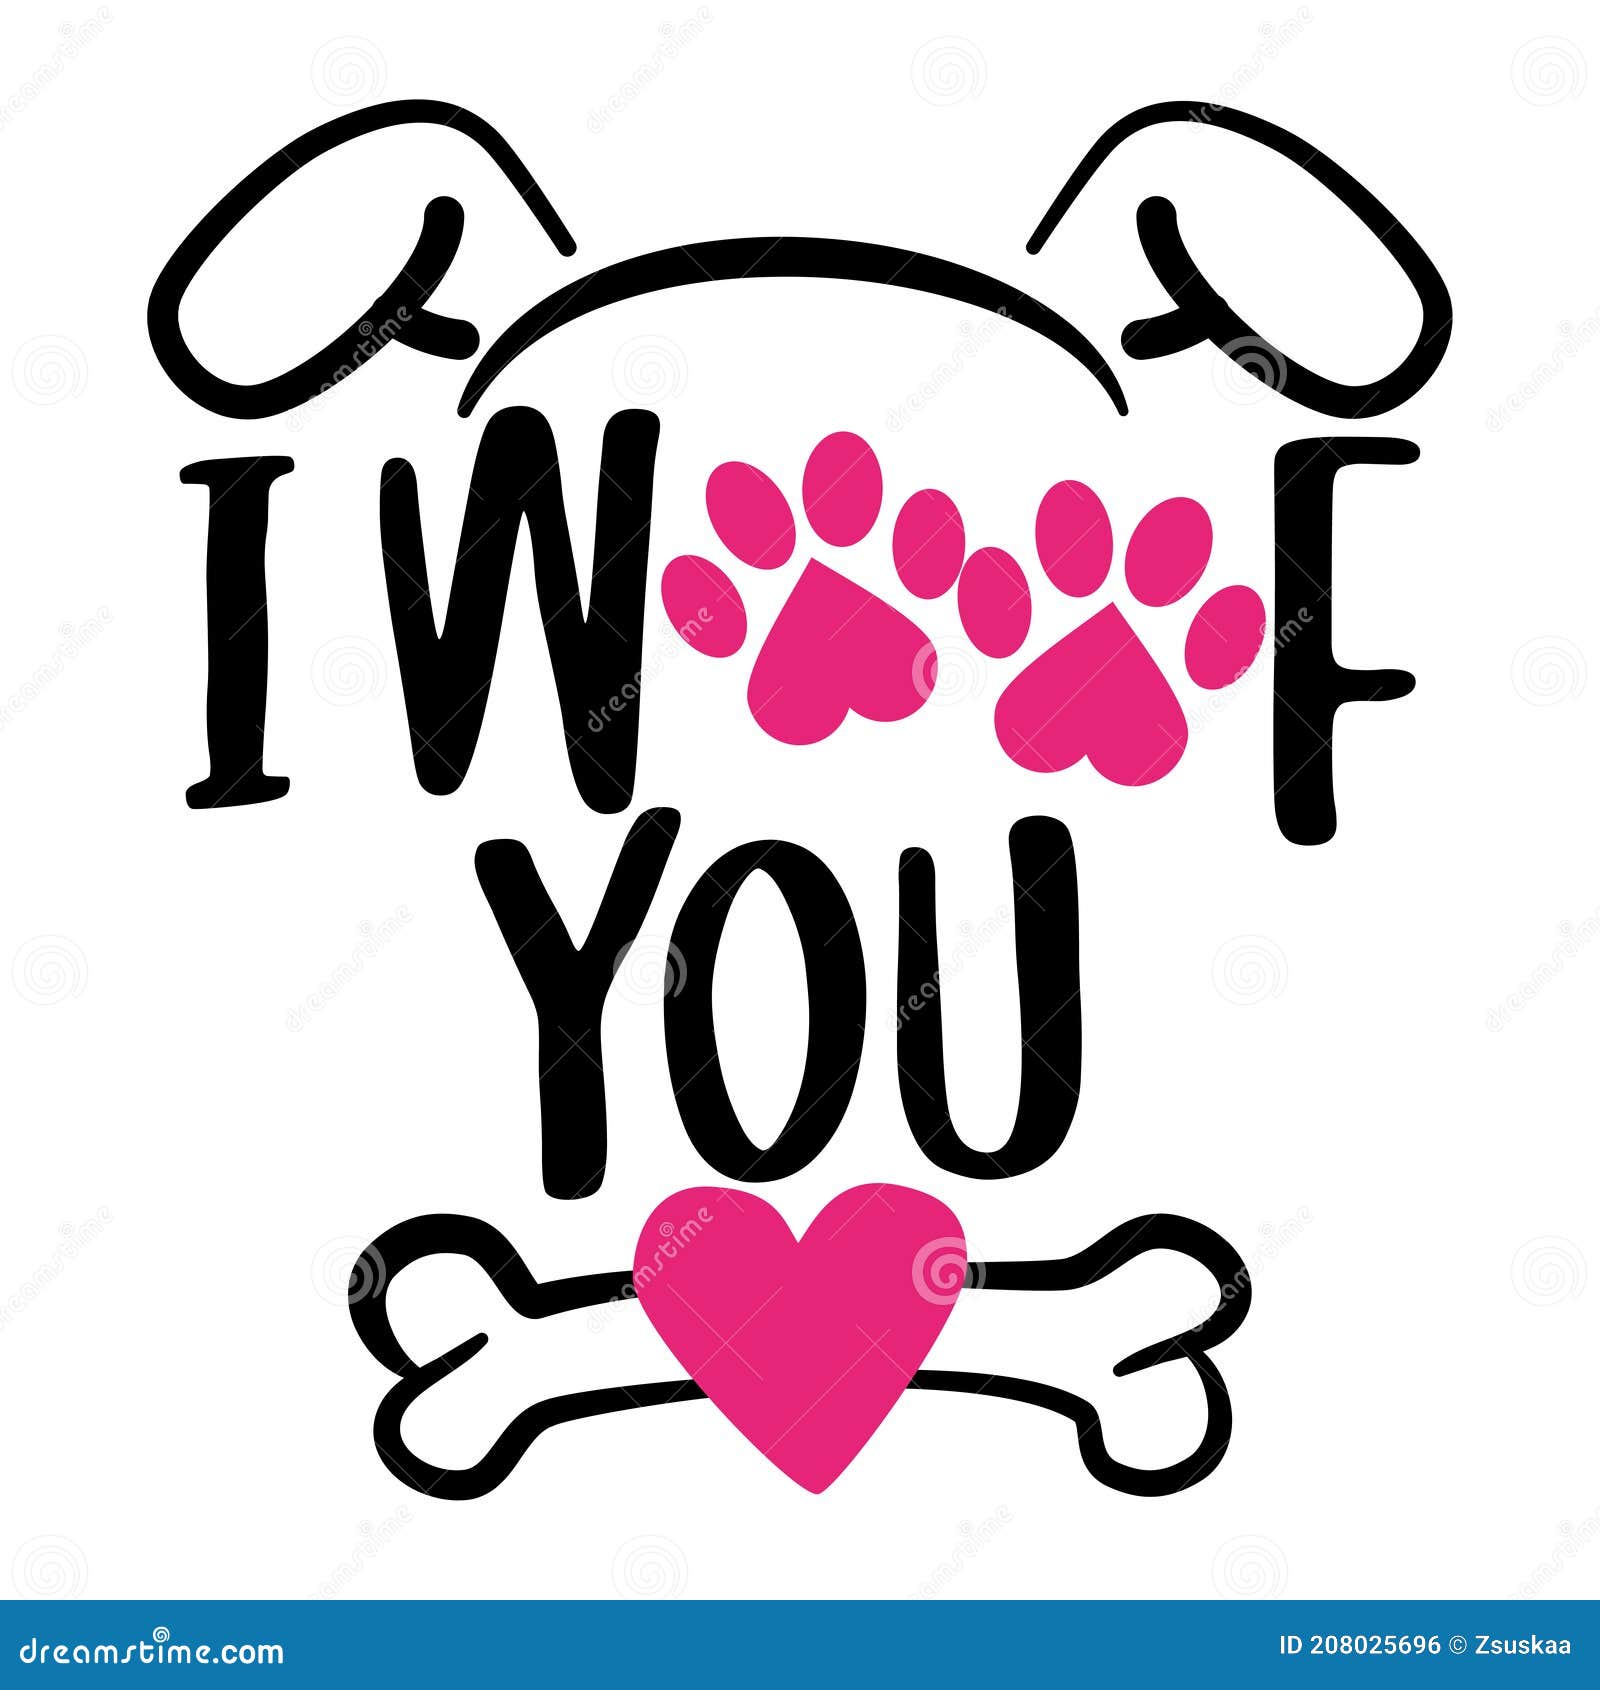 i woof you i love you in dog language - words with dog footprint